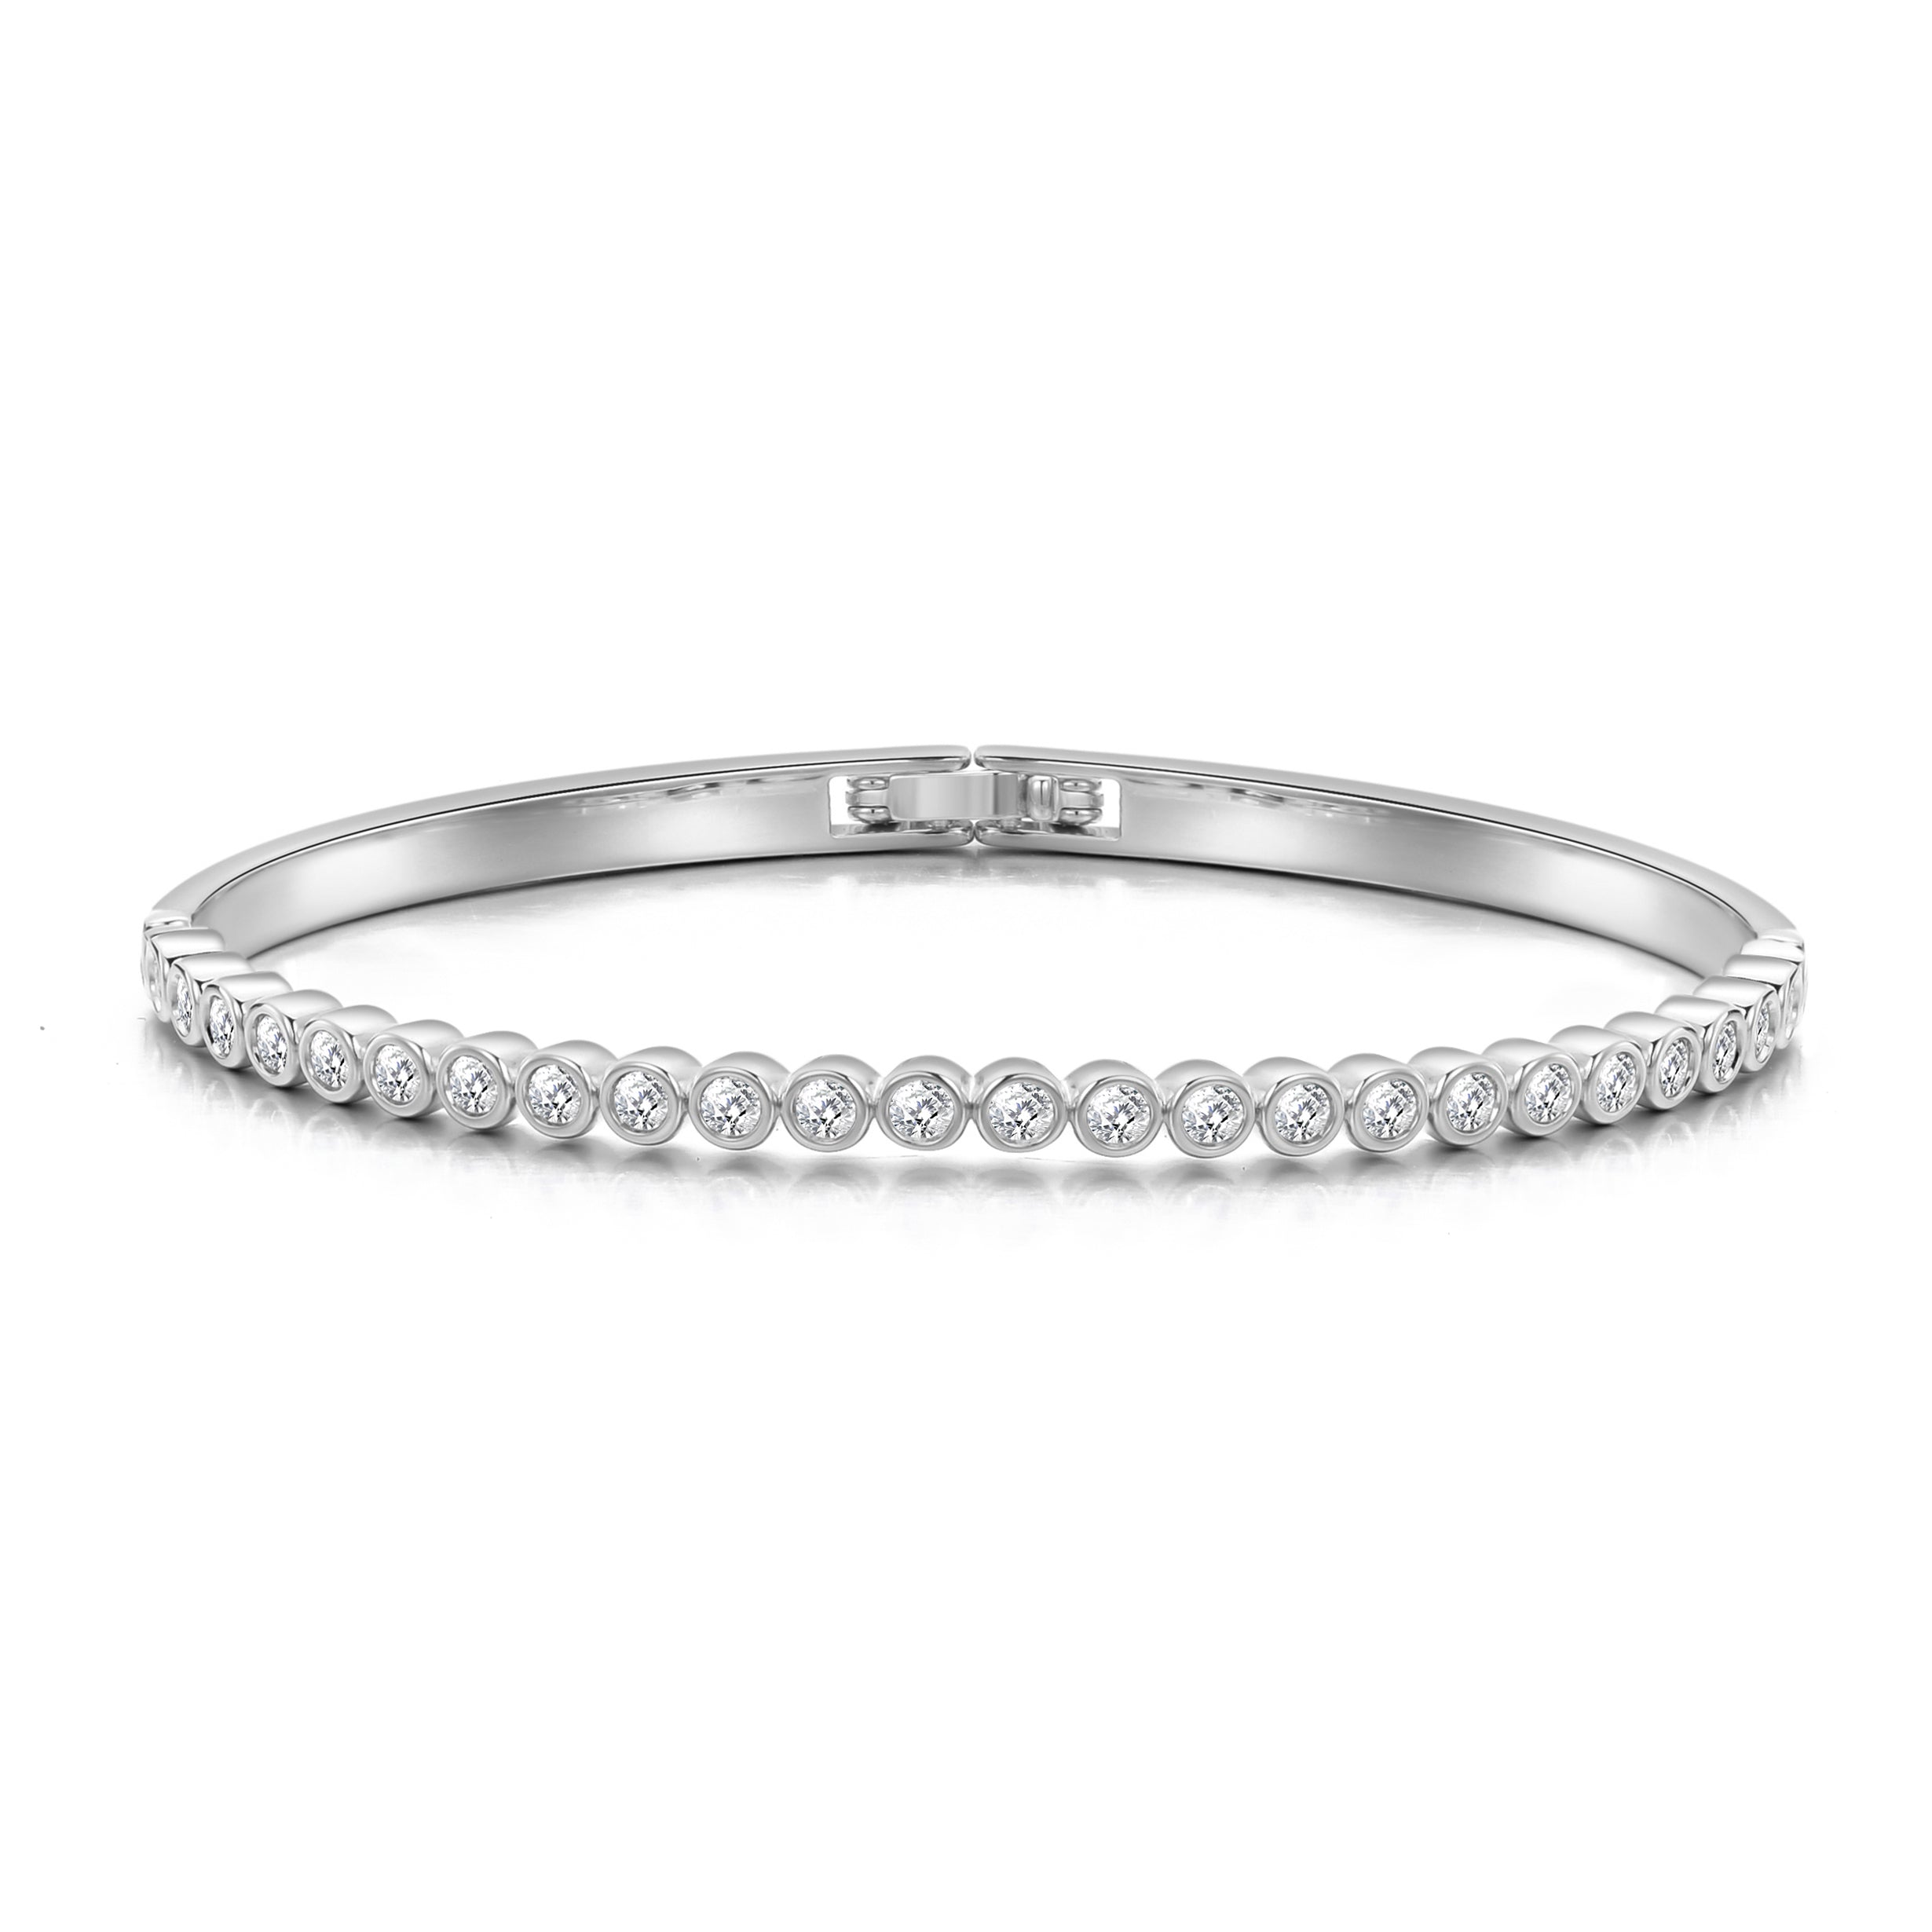 Silver Plated Tennis Bangle Created with Zircondia® Crystals by Philip Jones Jewellery